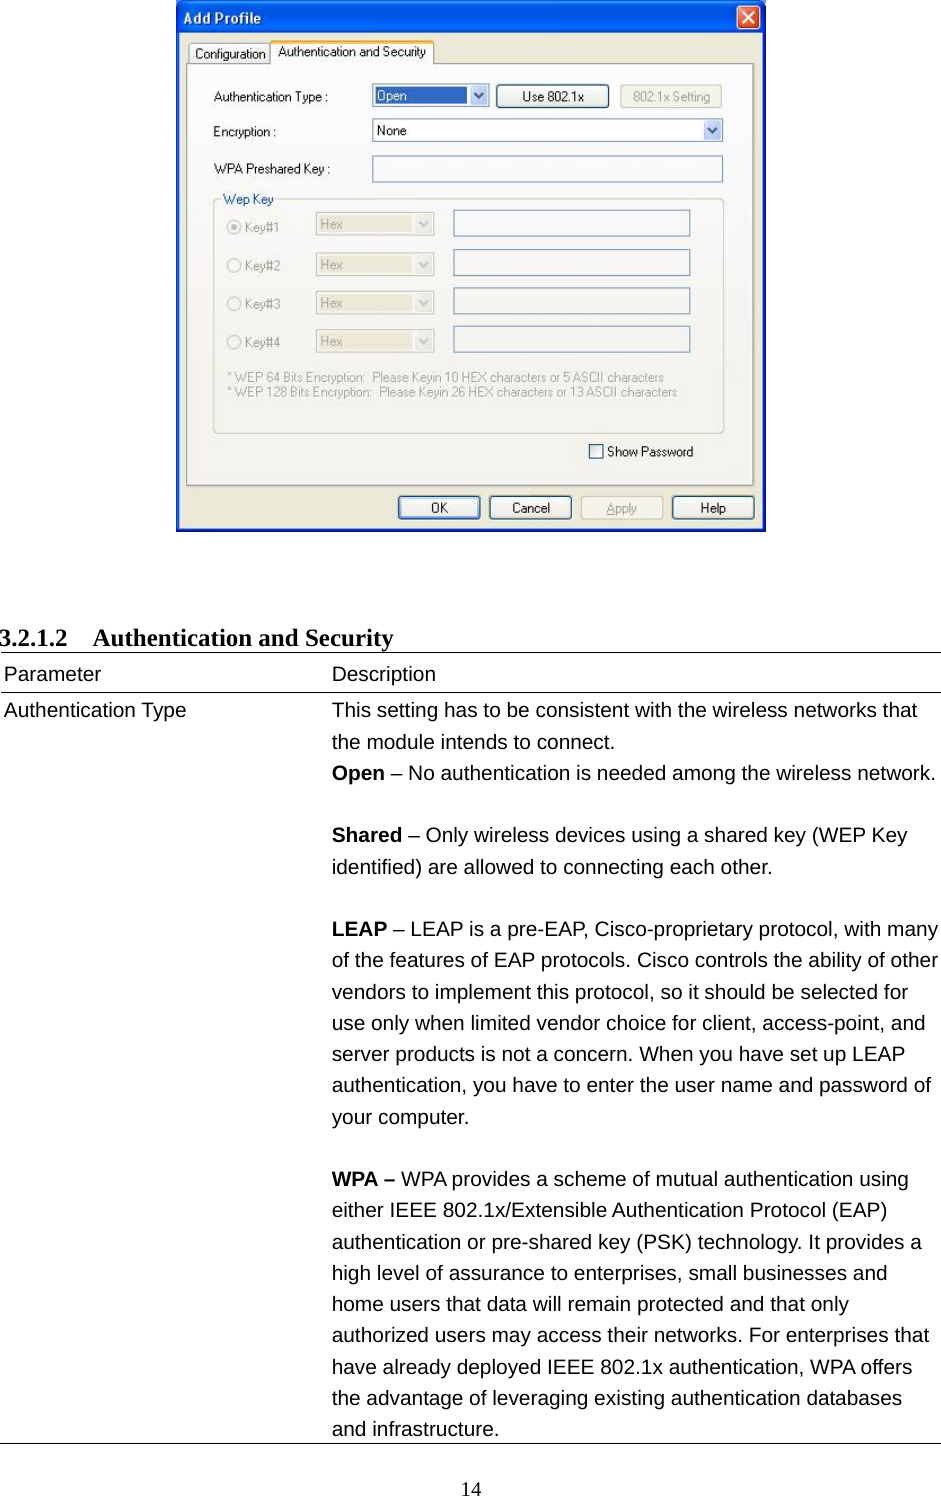  14      3.2.1.2  Authentication and Security Parameter Description Authentication Type  This setting has to be consistent with the wireless networks that the module intends to connect. Open – No authentication is needed among the wireless network. Shared – Only wireless devices using a shared key (WEP Key identified) are allowed to connecting each other.    LEAP – LEAP is a pre-EAP, Cisco-proprietary protocol, with many of the features of EAP protocols. Cisco controls the ability of other vendors to implement this protocol, so it should be selected for use only when limited vendor choice for client, access-point, and server products is not a concern. When you have set up LEAP authentication, you have to enter the user name and password of your computer.  WPA – WPA provides a scheme of mutual authentication using either IEEE 802.1x/Extensible Authentication Protocol (EAP) authentication or pre-shared key (PSK) technology. It provides a high level of assurance to enterprises, small businesses and home users that data will remain protected and that only authorized users may access their networks. For enterprises that have already deployed IEEE 802.1x authentication, WPA offers the advantage of leveraging existing authentication databases and infrastructure.   